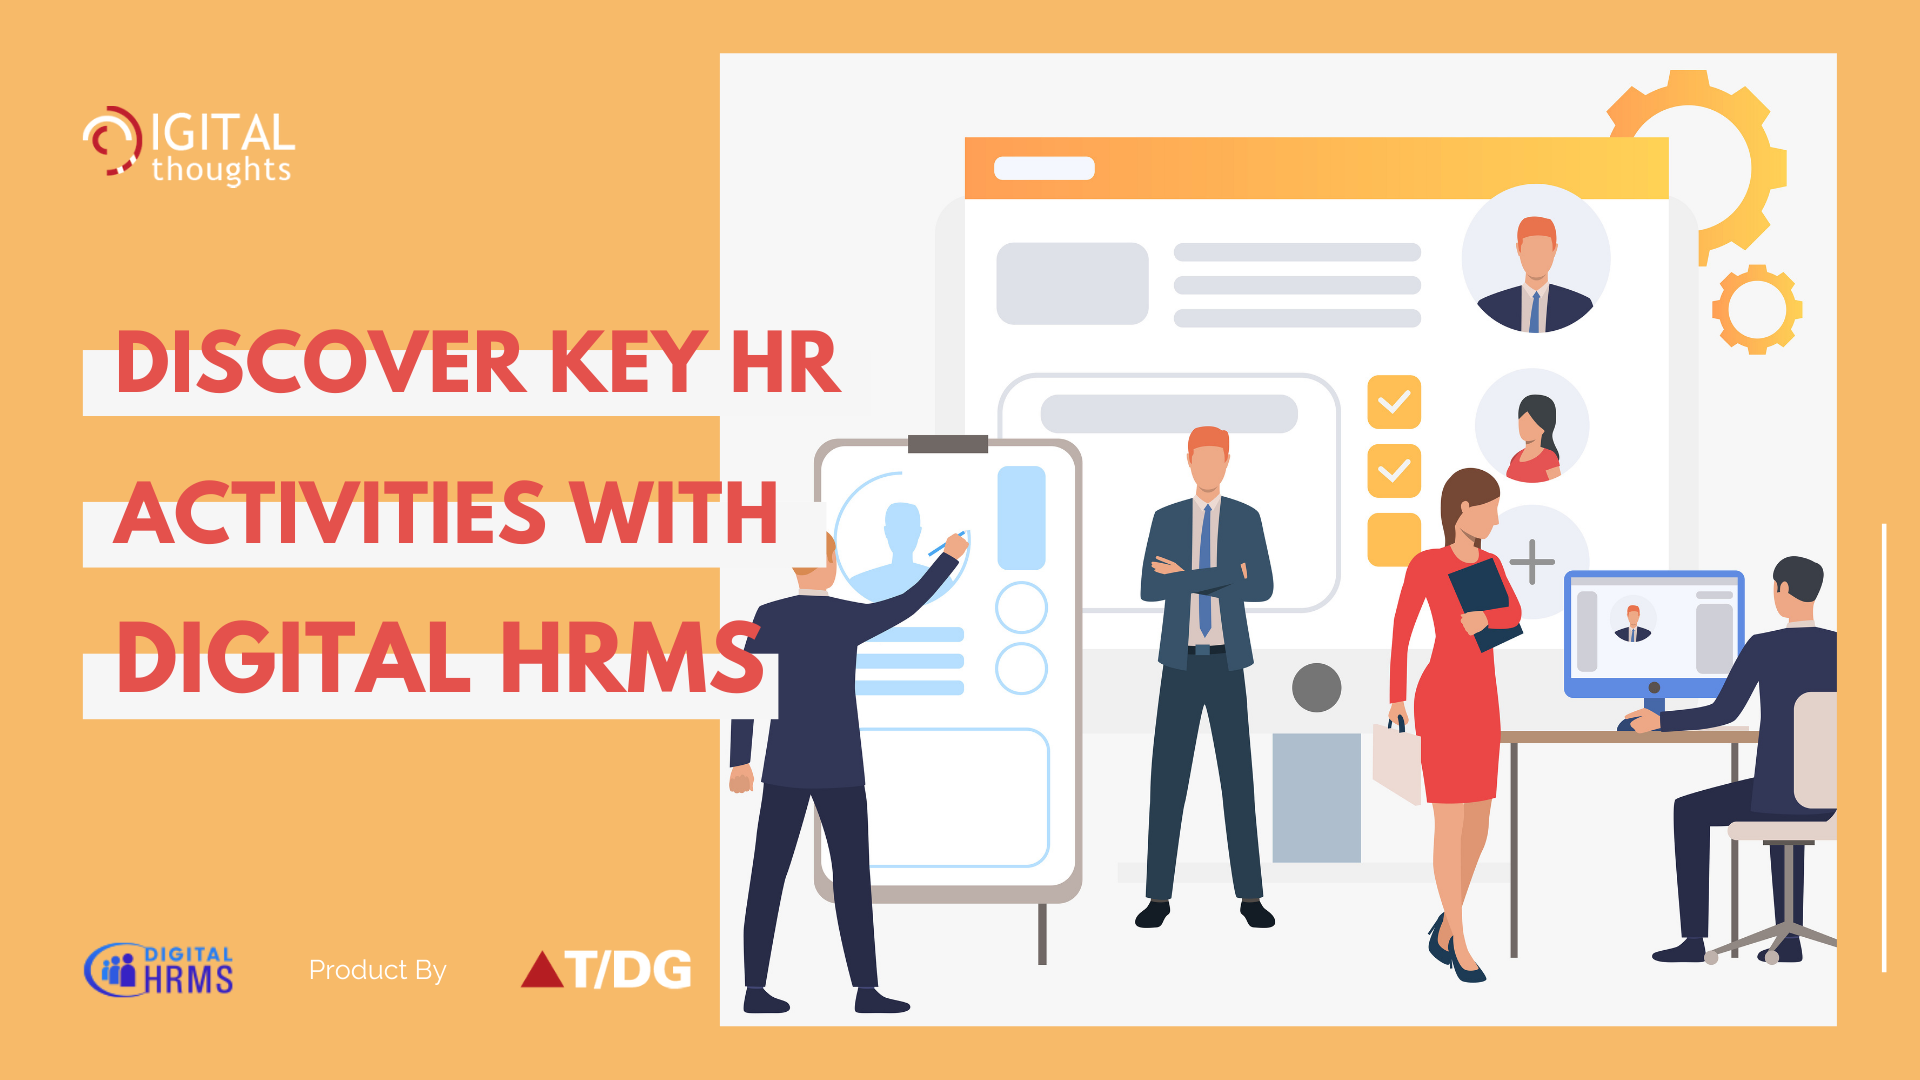 Exploring the Role of Digital HRMS in Simplifying Key HR Activities